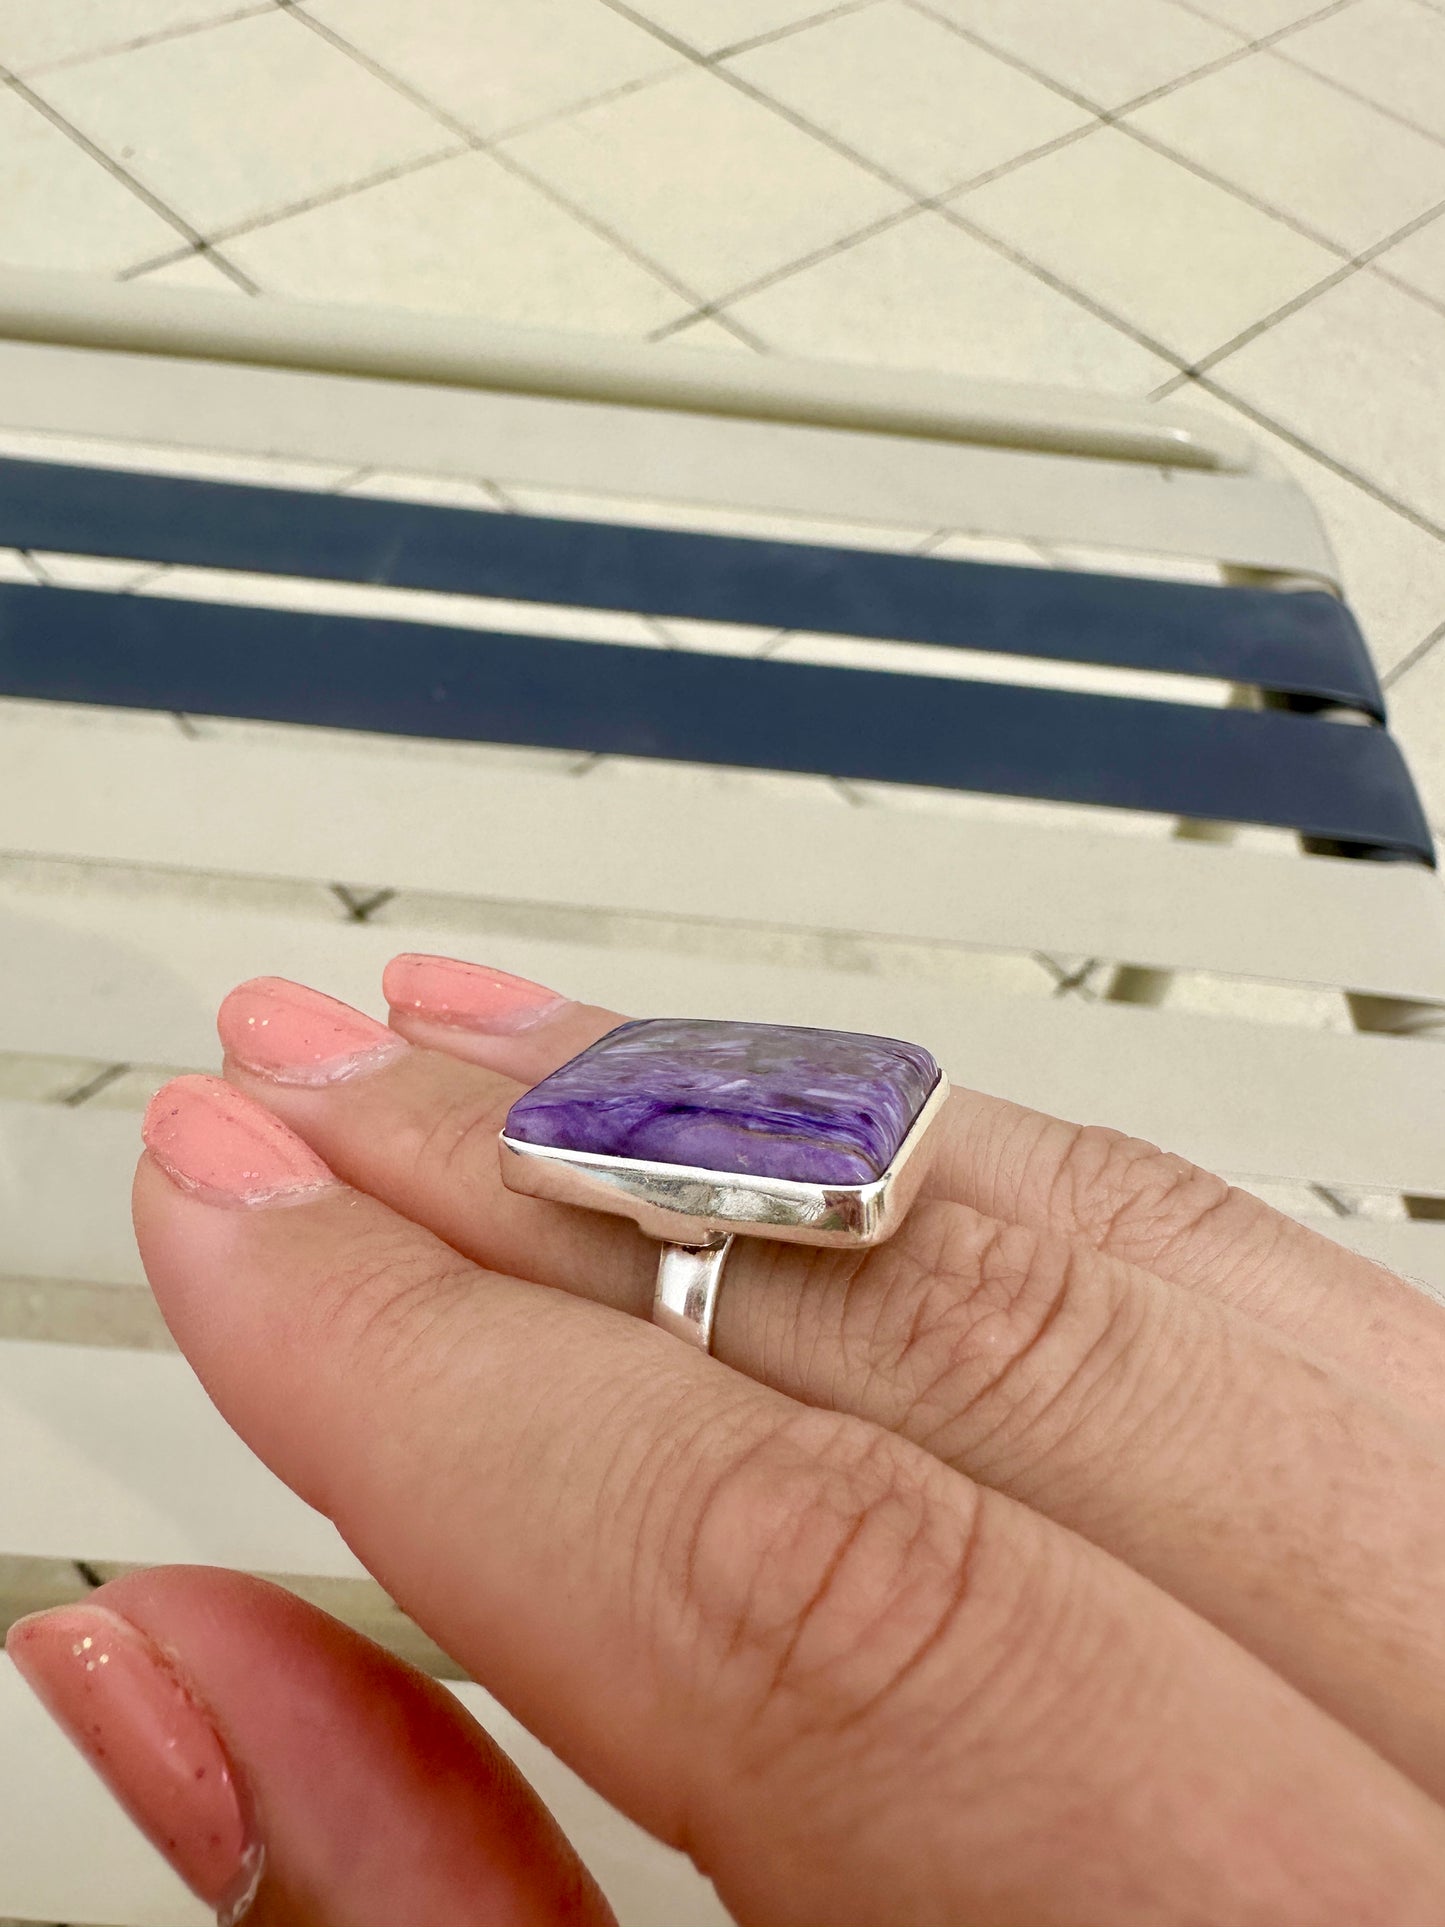 Charoite Sterling Silver Ring, Size 8.75, Exquisite Purple Gemstone, Elegant Handcrafted Jewelry, Perfect Gift for Special Occasions, Unique Artisan Design